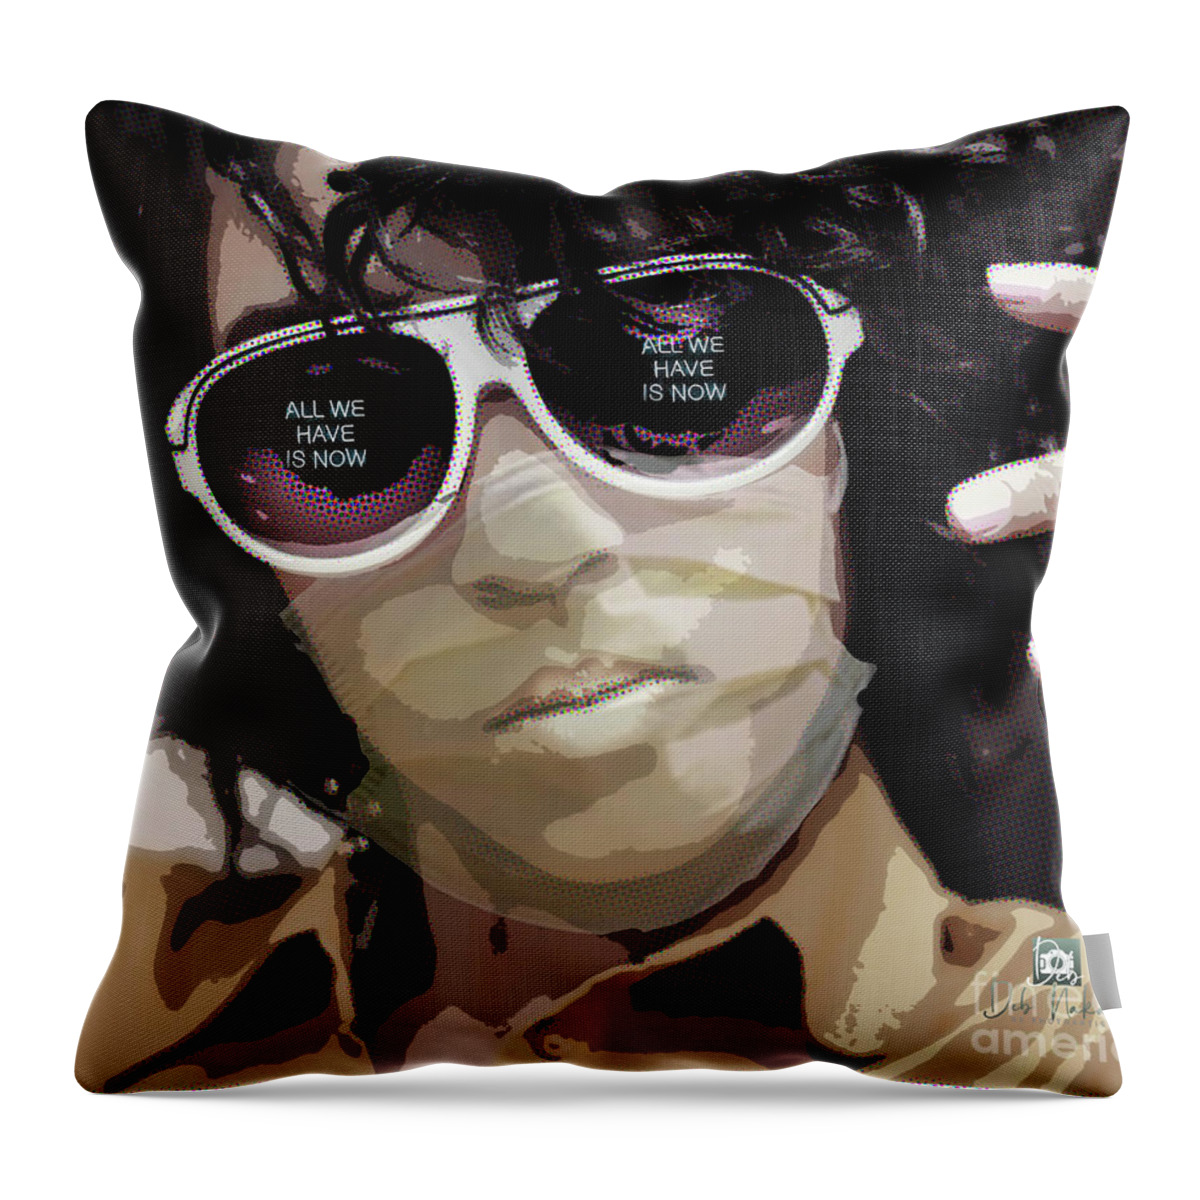 Covid Mask Throw Pillow featuring the digital art All We Have..... by Deb Nakano